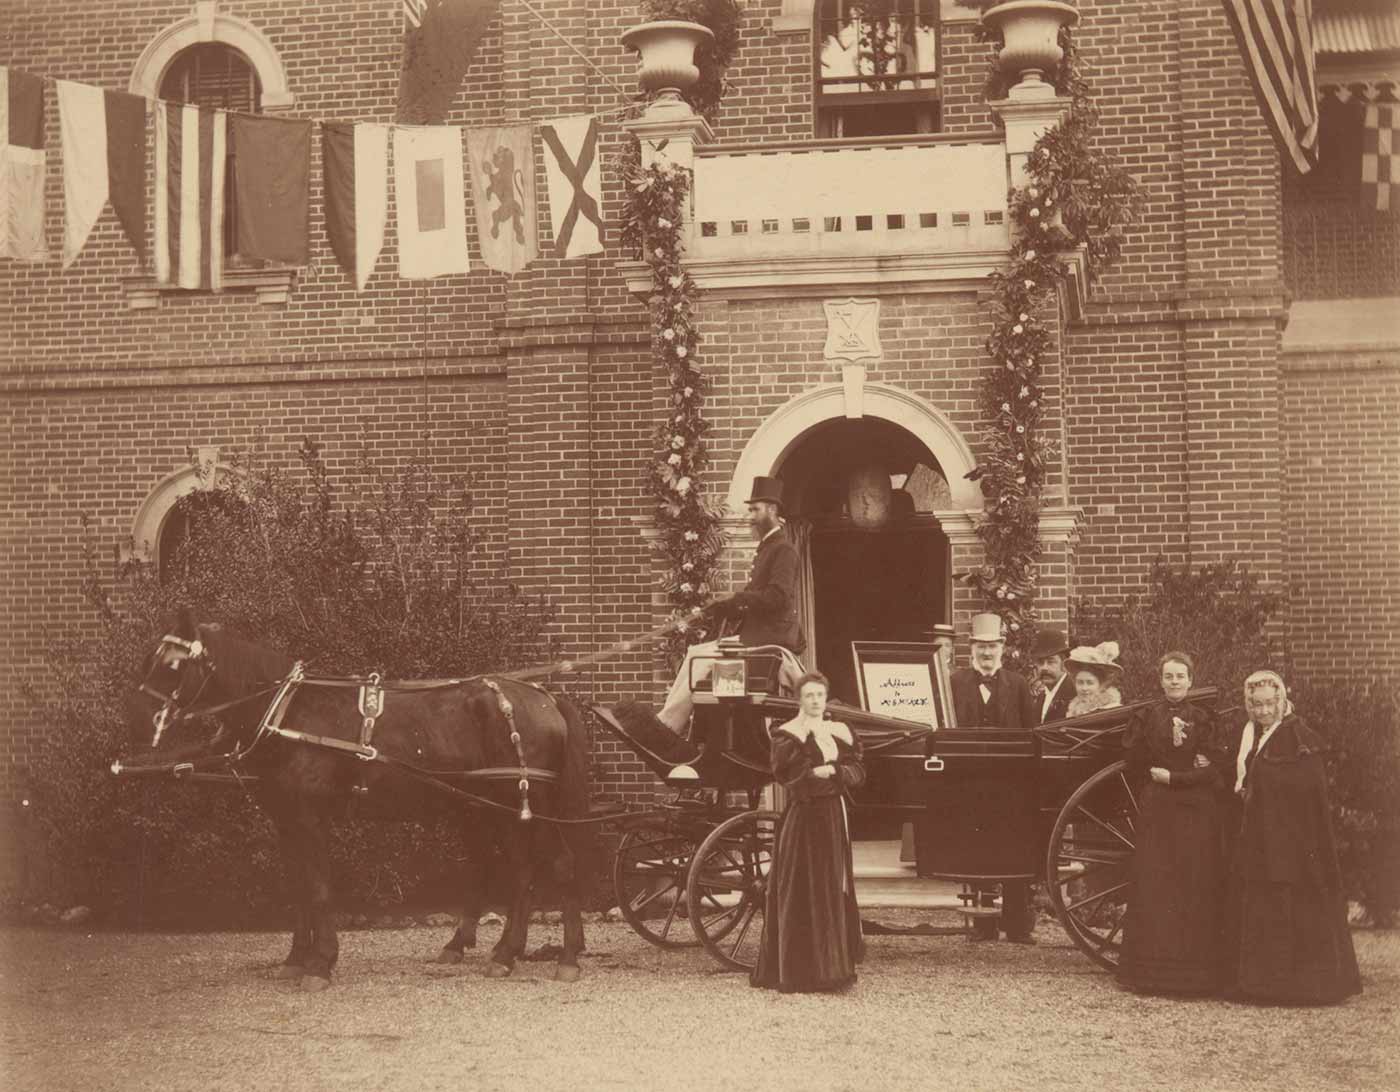 Sepia coloured photograph showing a landau carriage pulled by a horse standing in front of the homestead entrance with the honeymoon couple being greeted by relatives. - click to view larger image